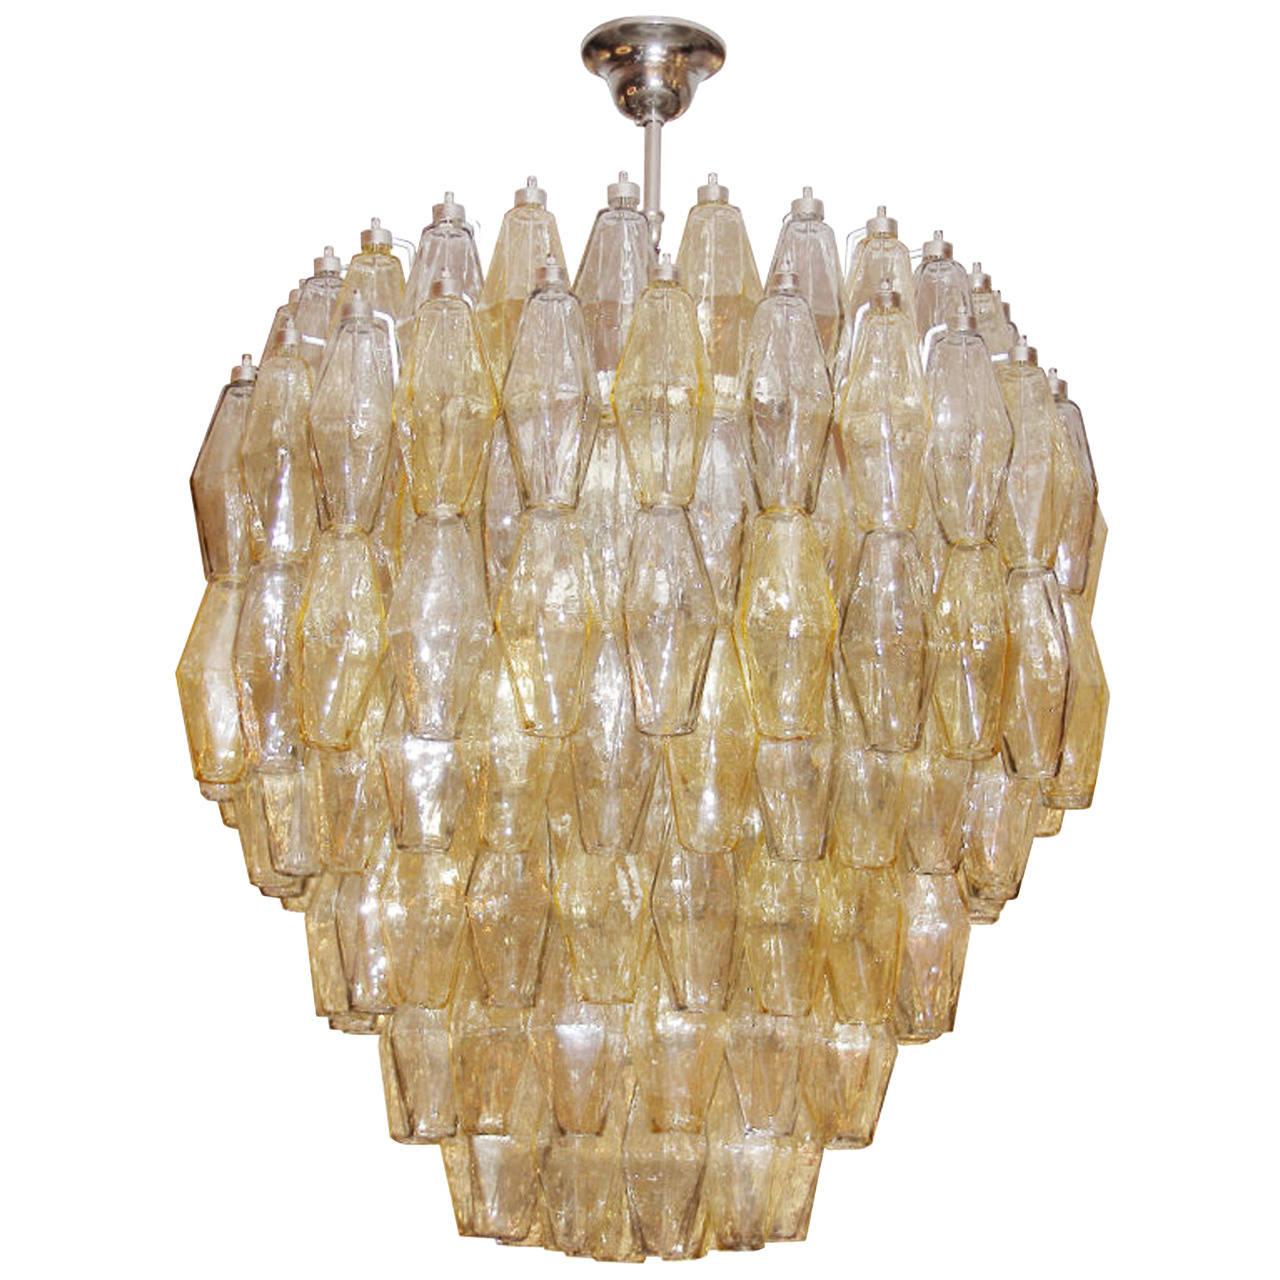 An exquisite Venini amber and pale gray tiered polyhedral glass chandelier with polished nickel hardware.